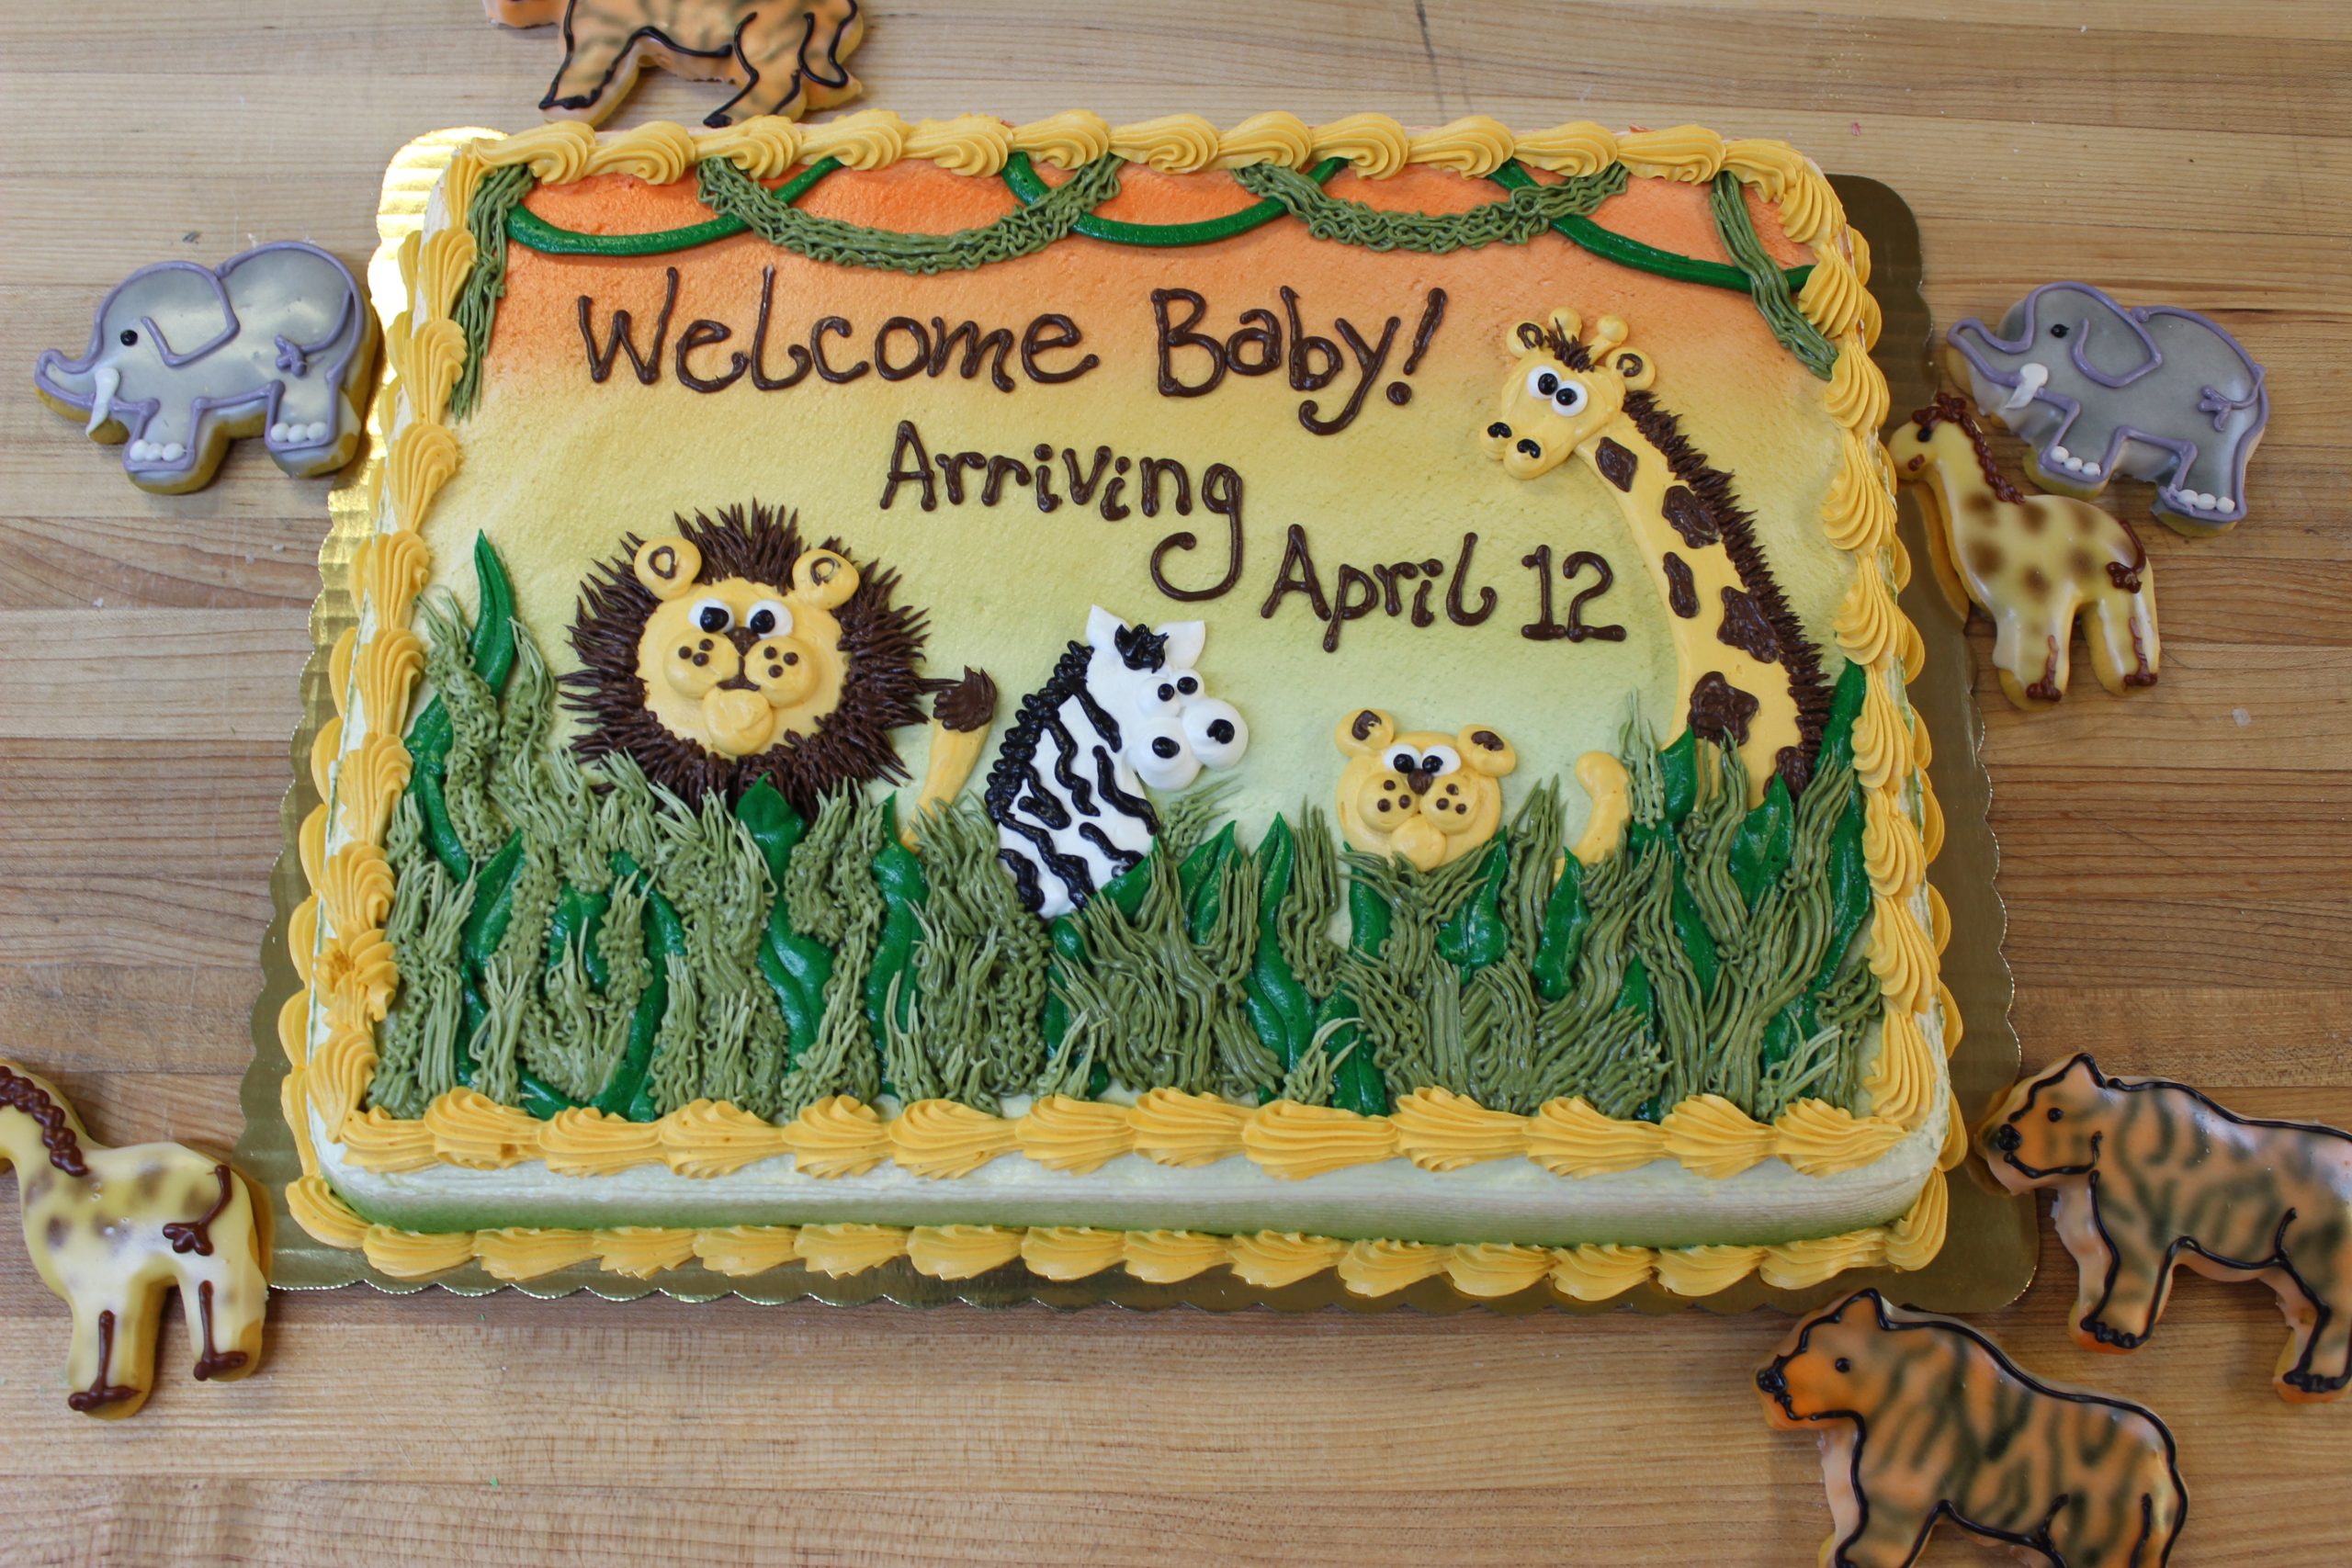 Zoo-rific Baby Shower Cakes Available!